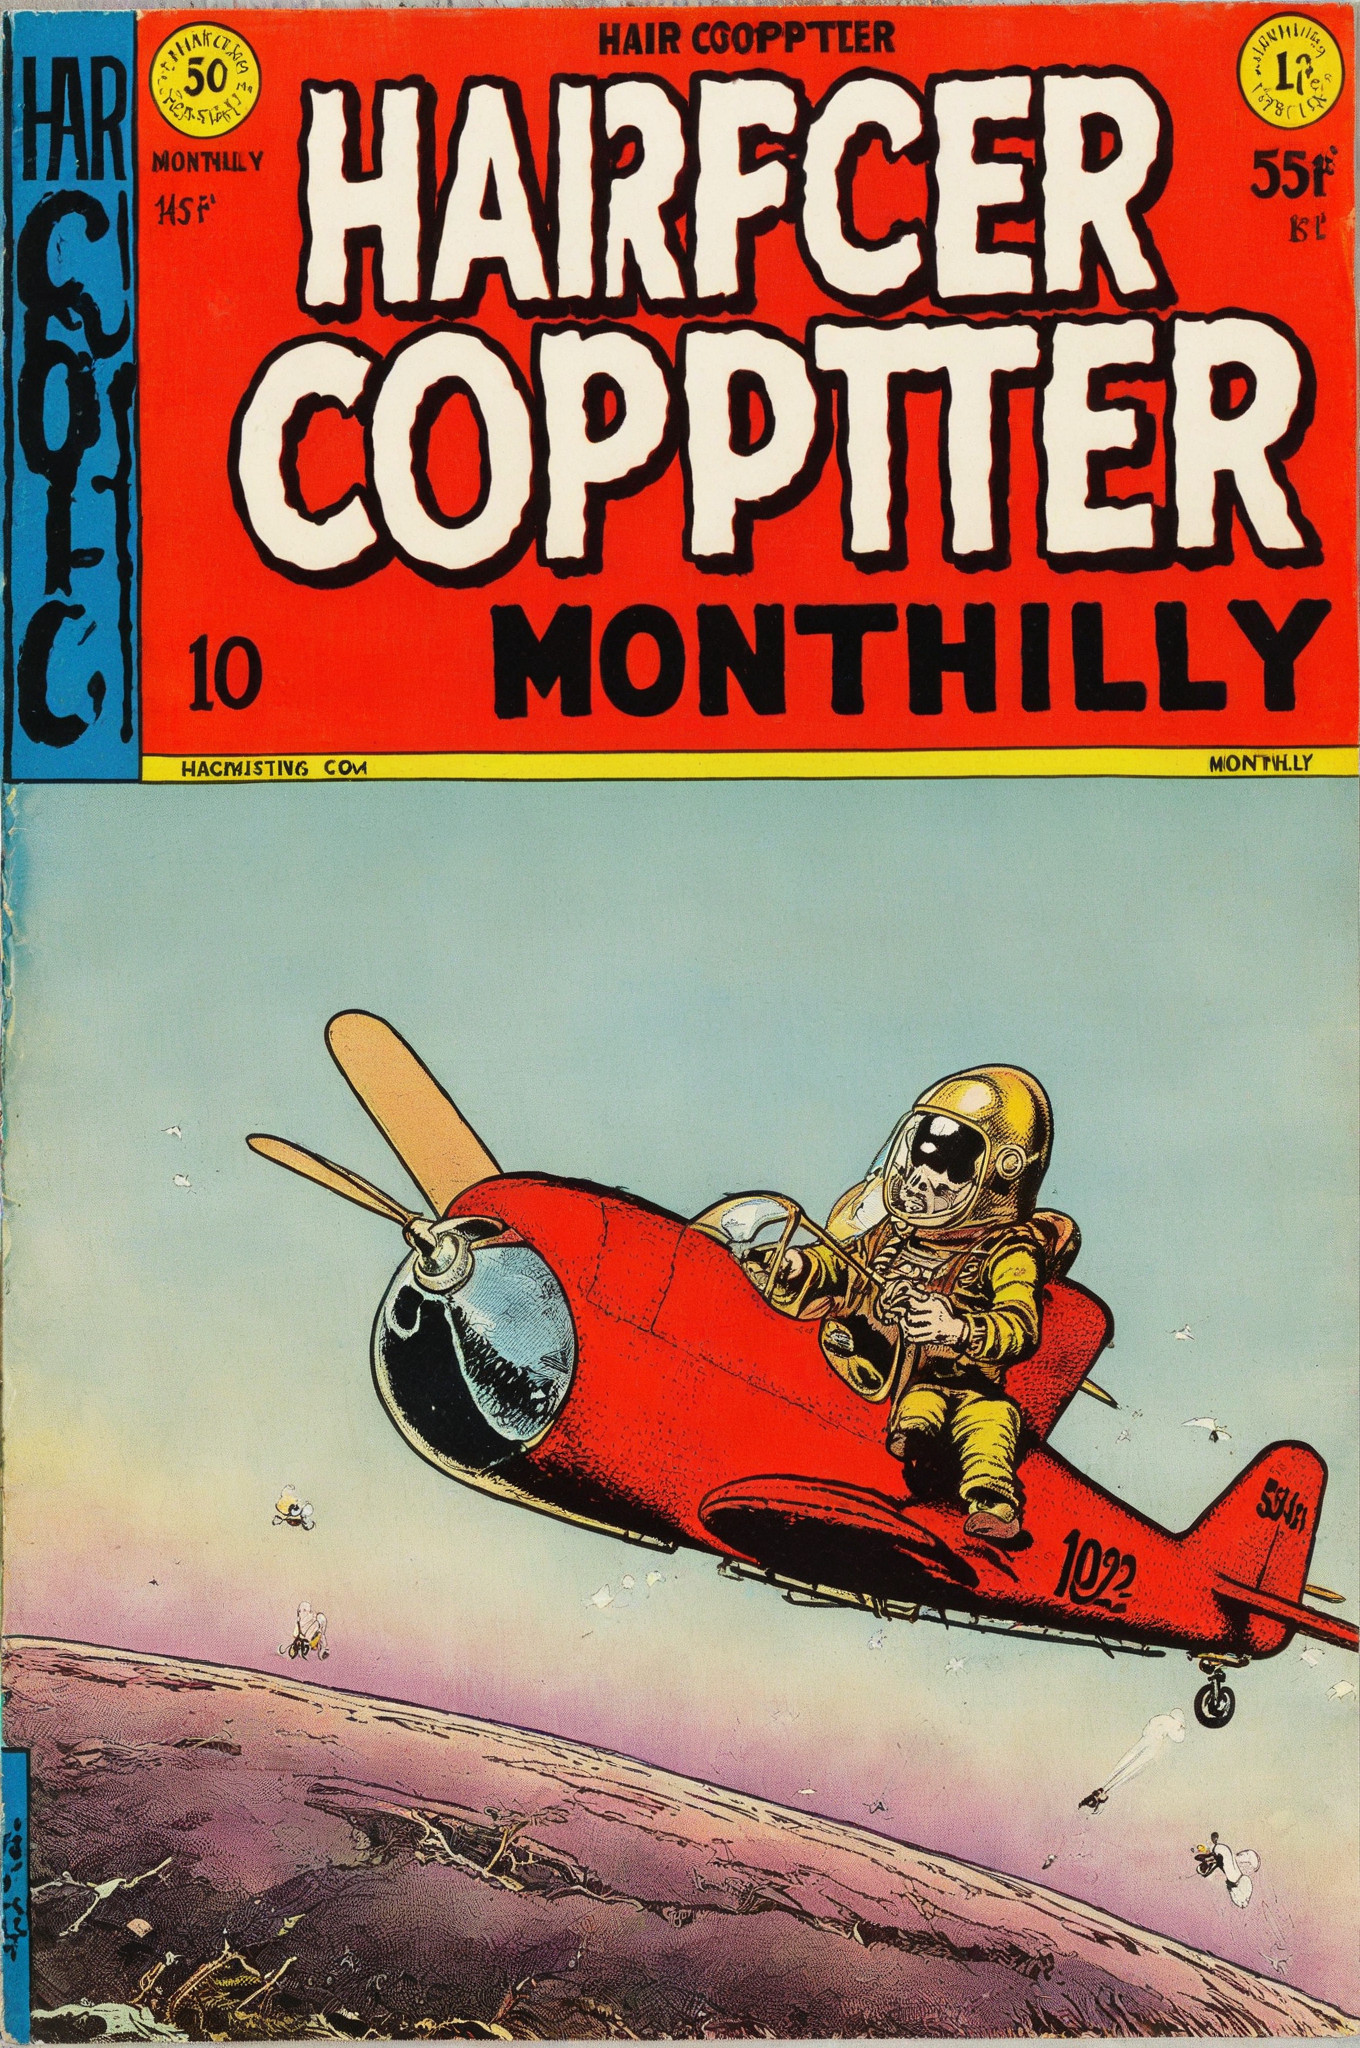 haircopter monthly, no. 10 "new earth copter"